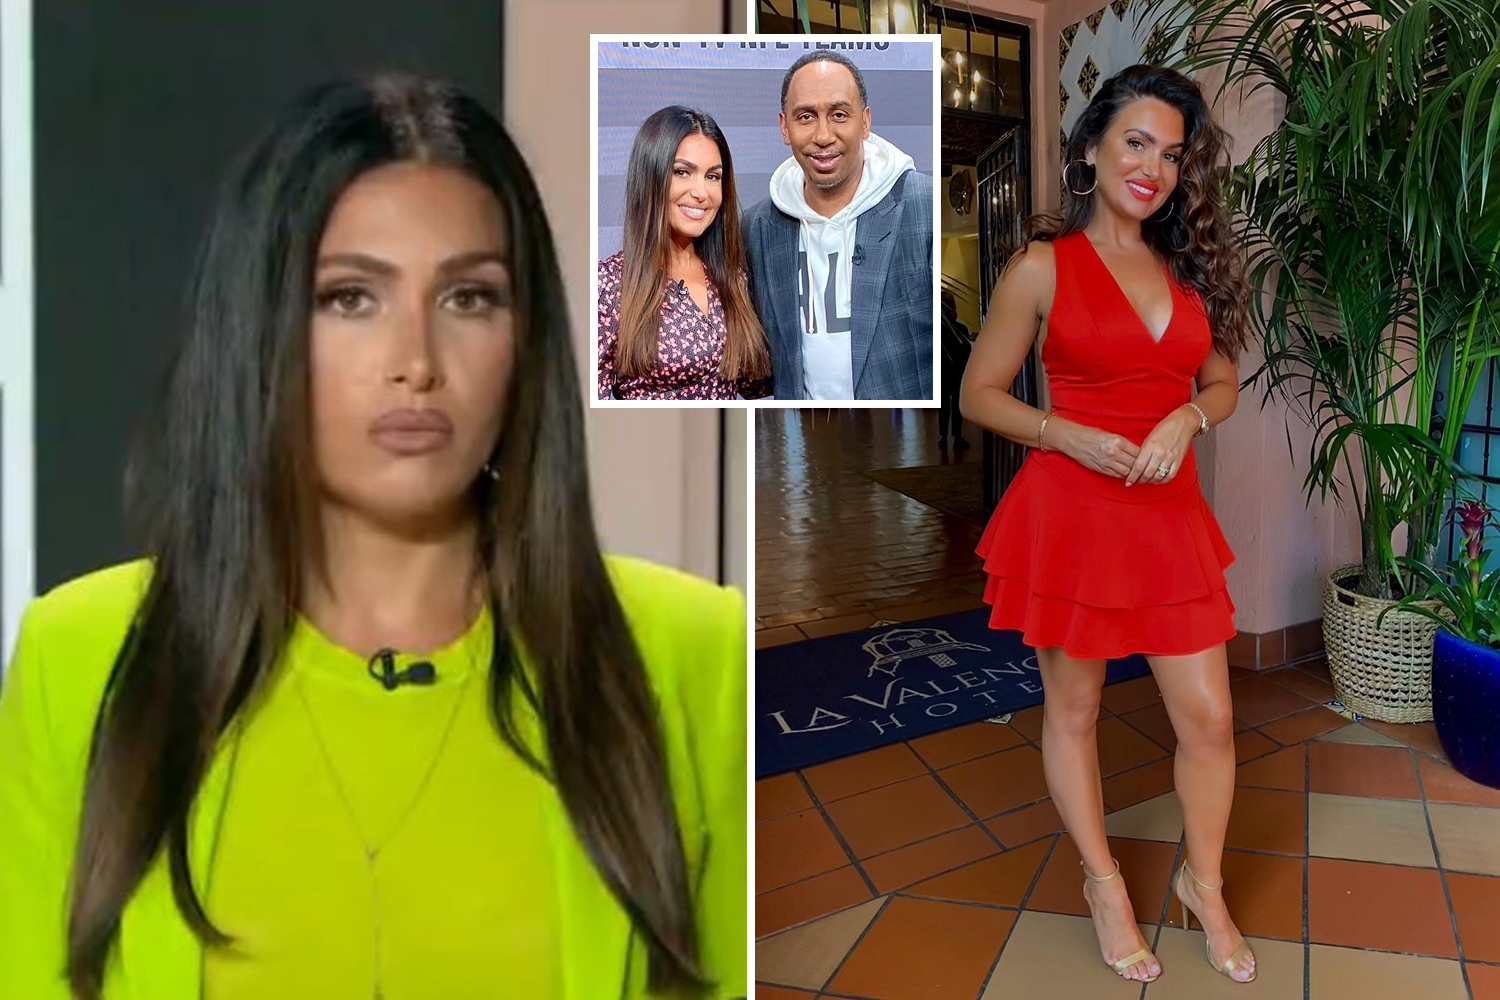 Stephen A Smith compliments 'aquawoman' Molly Qerim on ESPN First Take